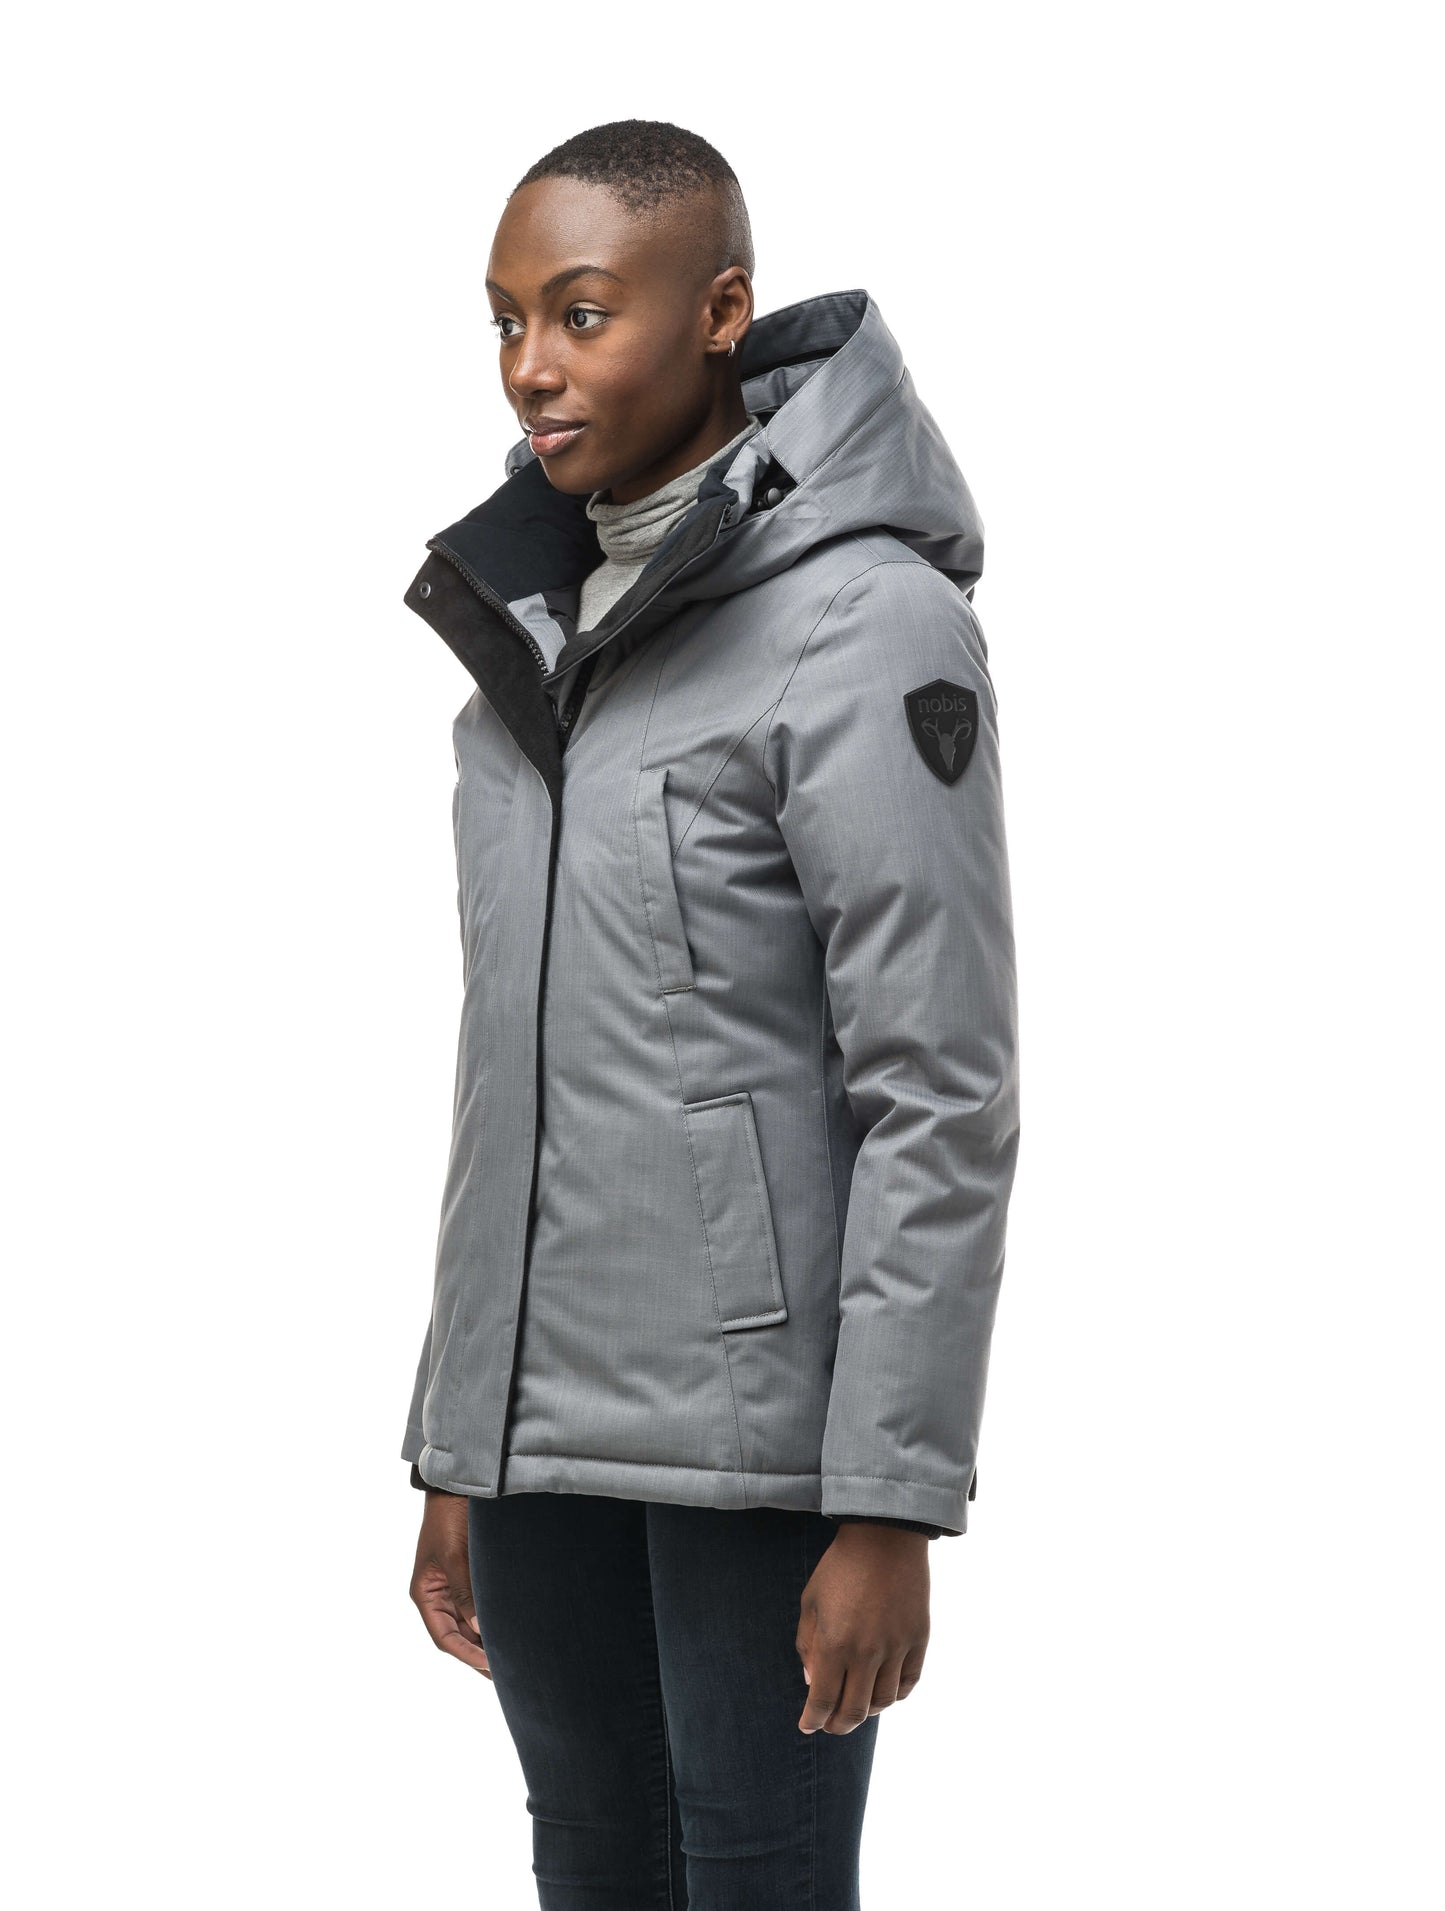 Women's hip length down filled parka with non-removable hood in CH Concrete